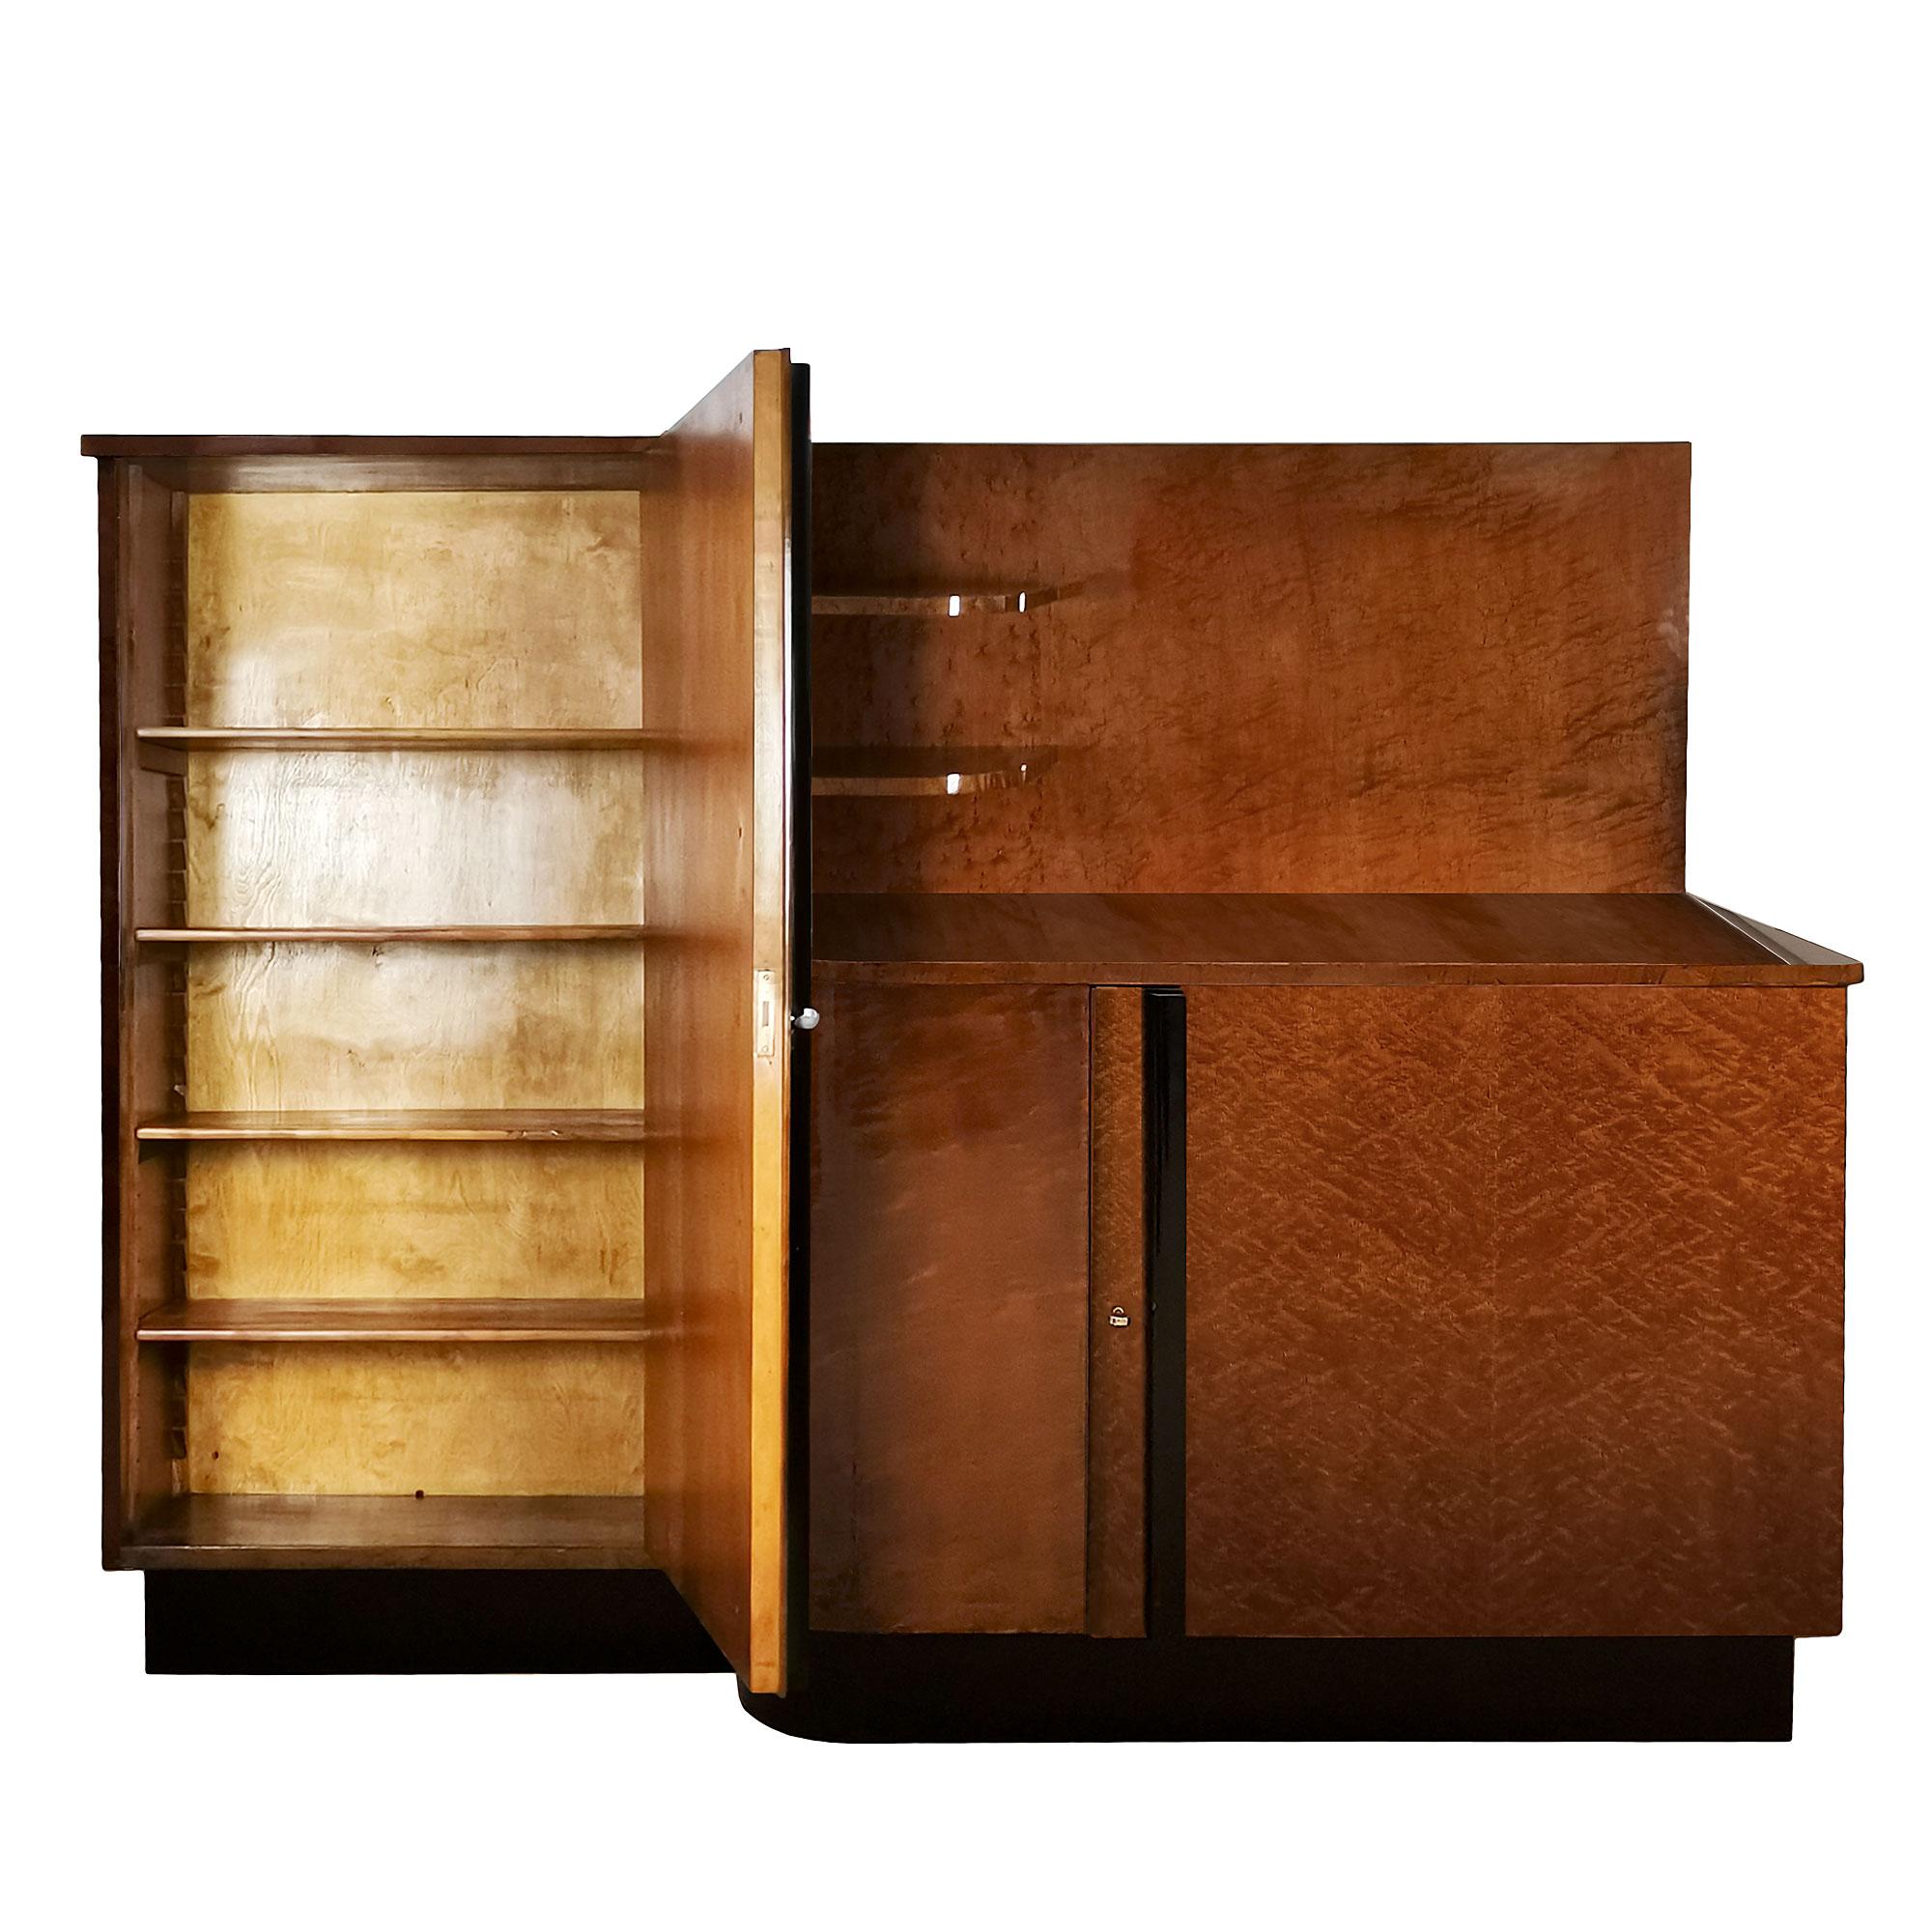 Polished Large Art Deco Sideboard Cabinet in Speckled Mahogany - Italy 1930 For Sale